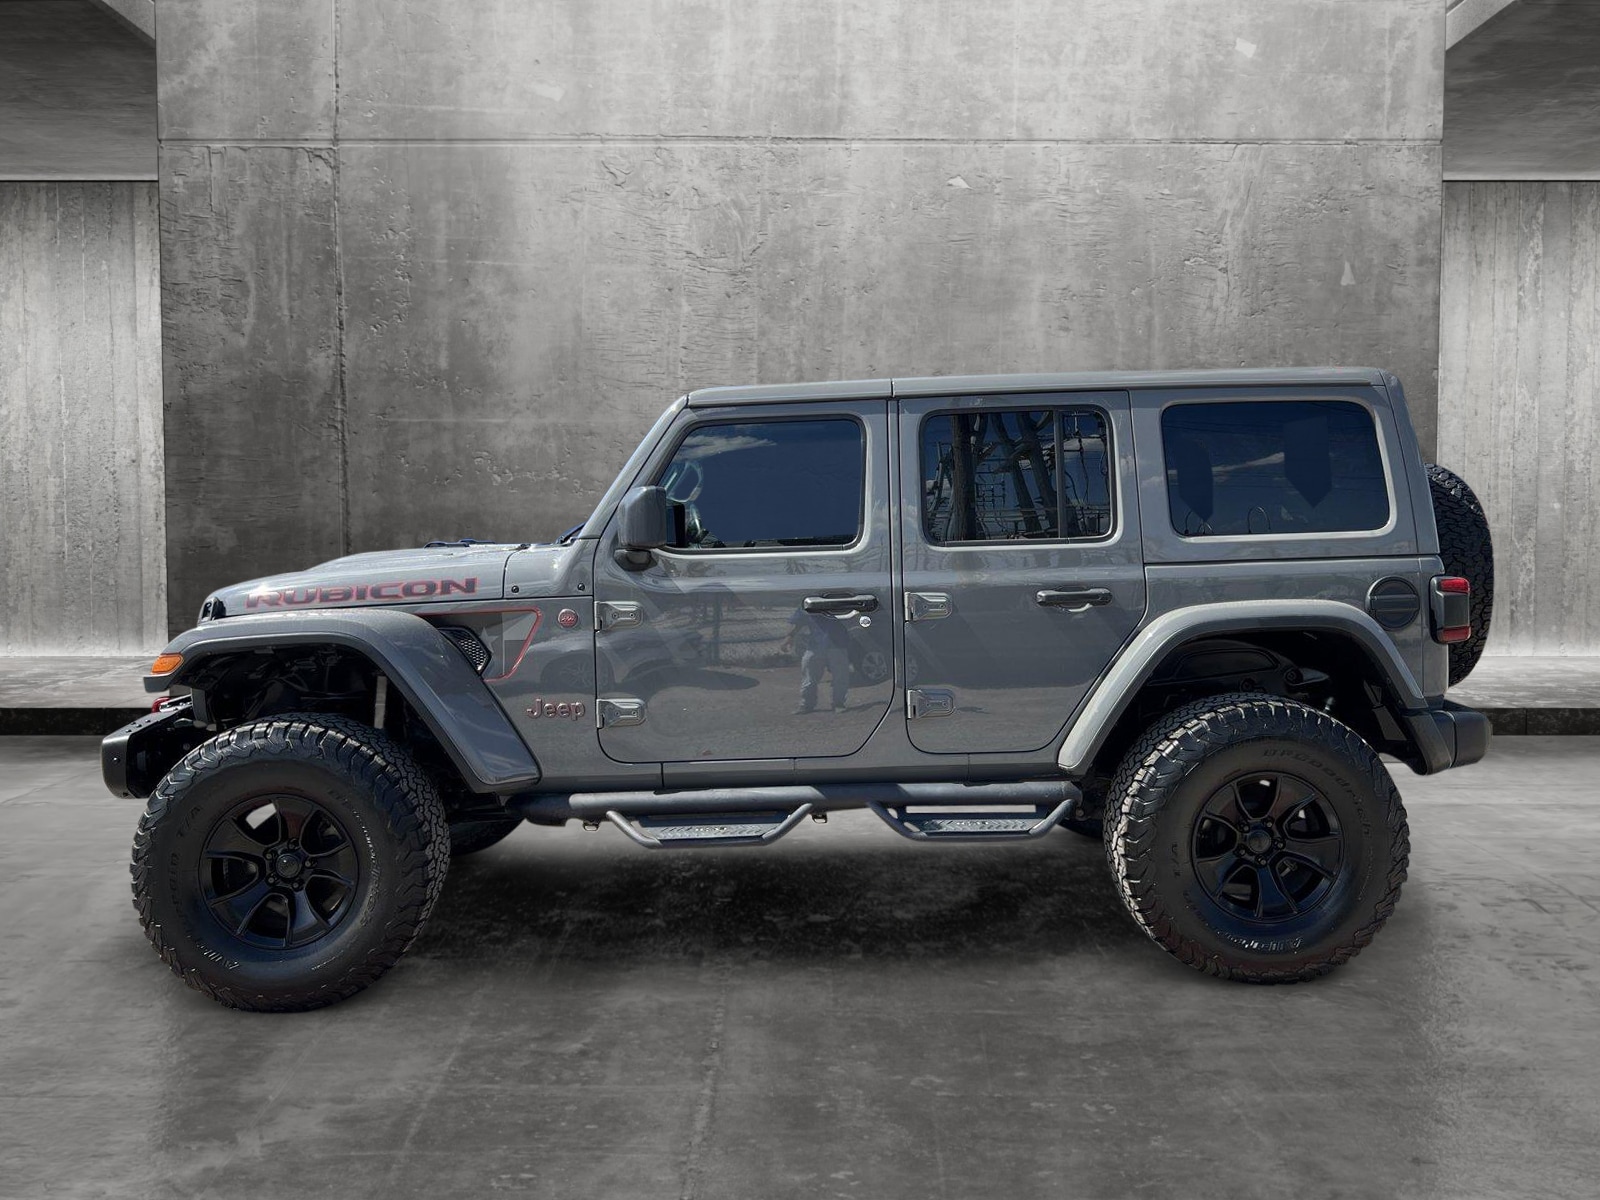 Used 2019 Jeep Wrangler Unlimited Rubicon with VIN 1C4HJXFG4KW659020 for sale in Burleson, TX